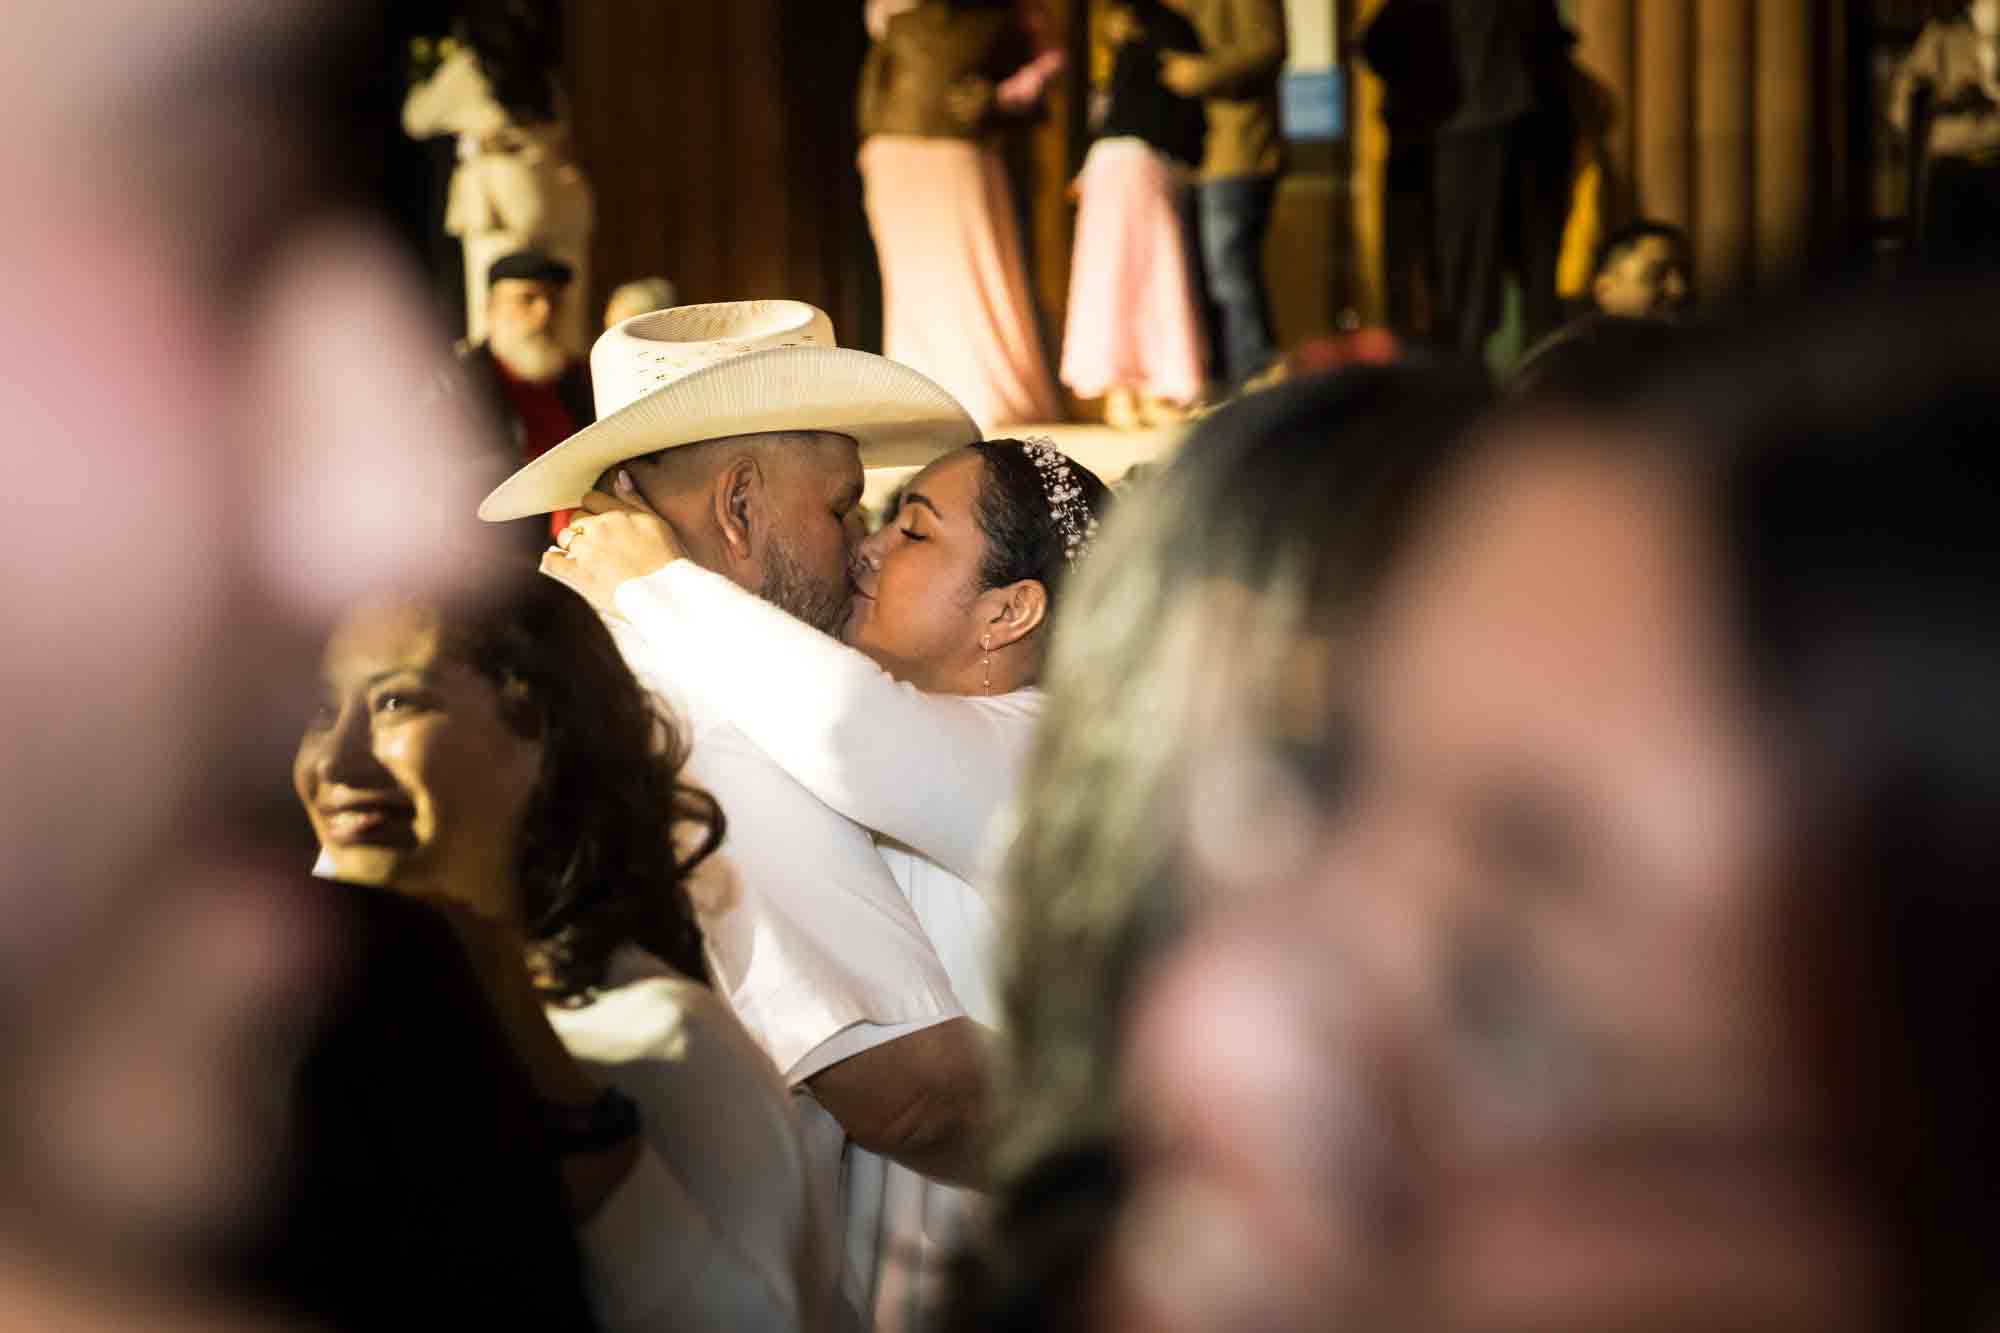 Couple kissing in crowd for an article on the Bexar county mass wedding event